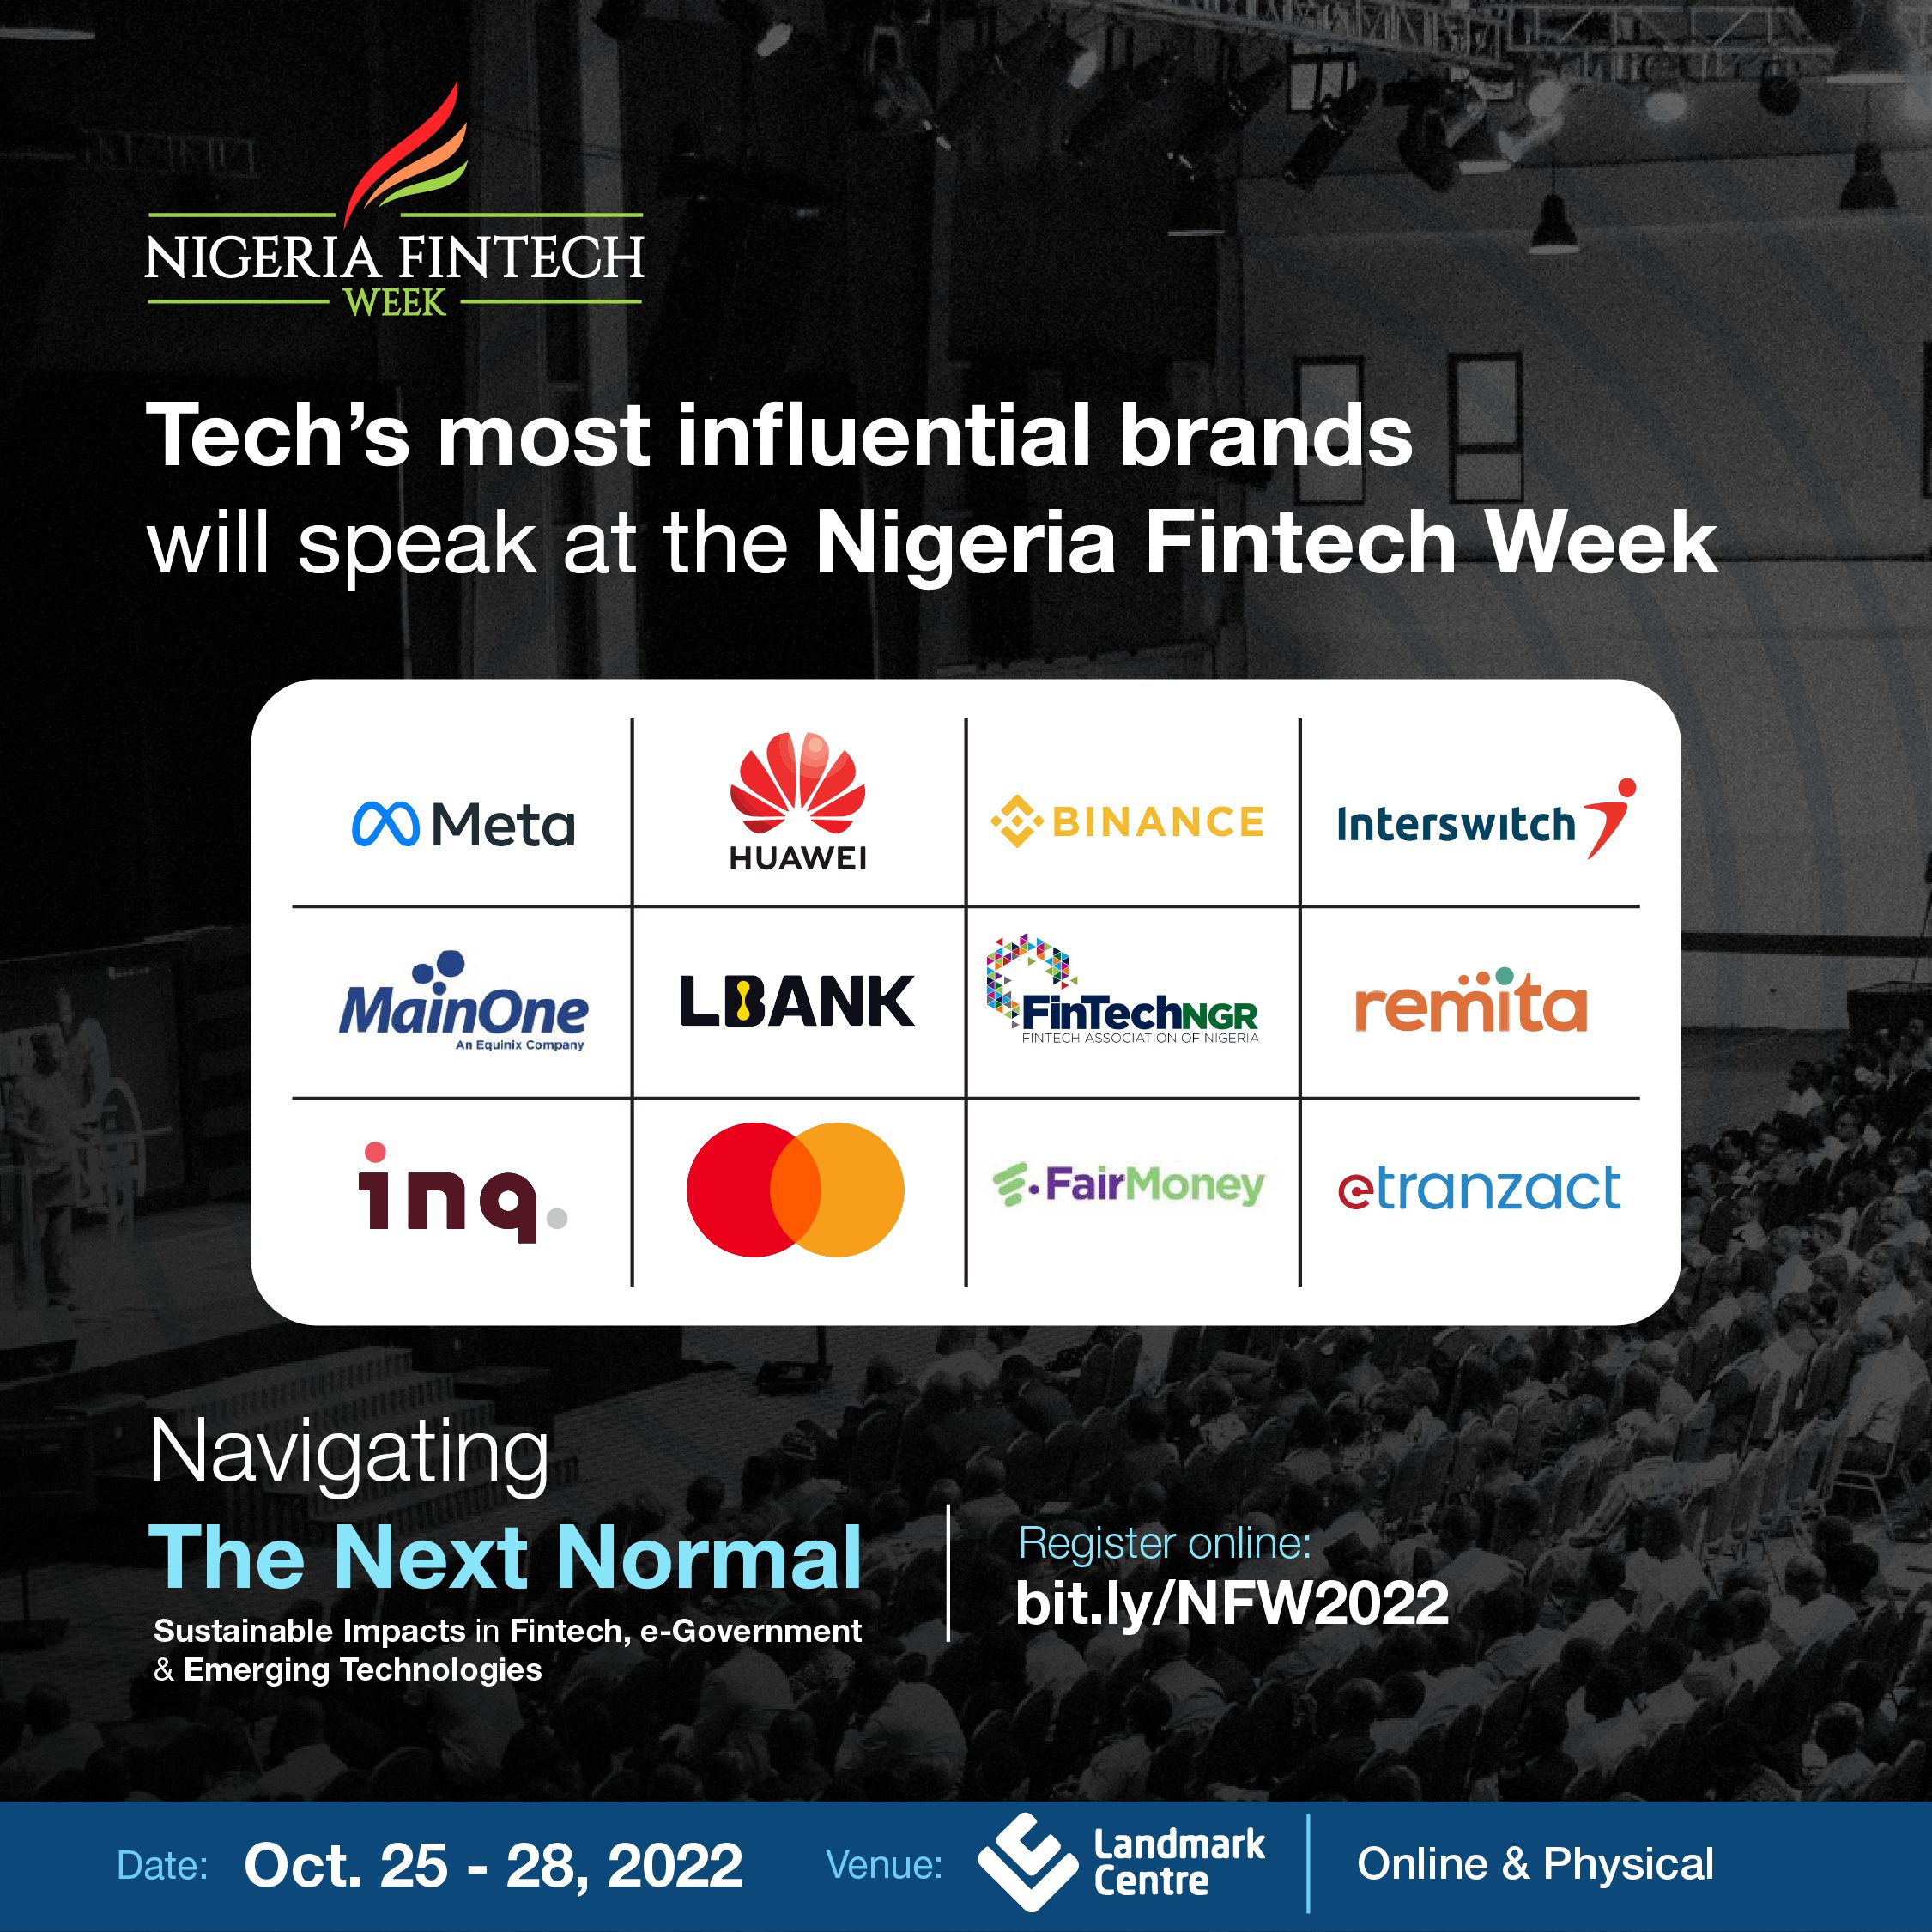 Nigeria Fintech Week 2022 kicks off October 25 to 28, unveils speakers, unique benefits and side attractions